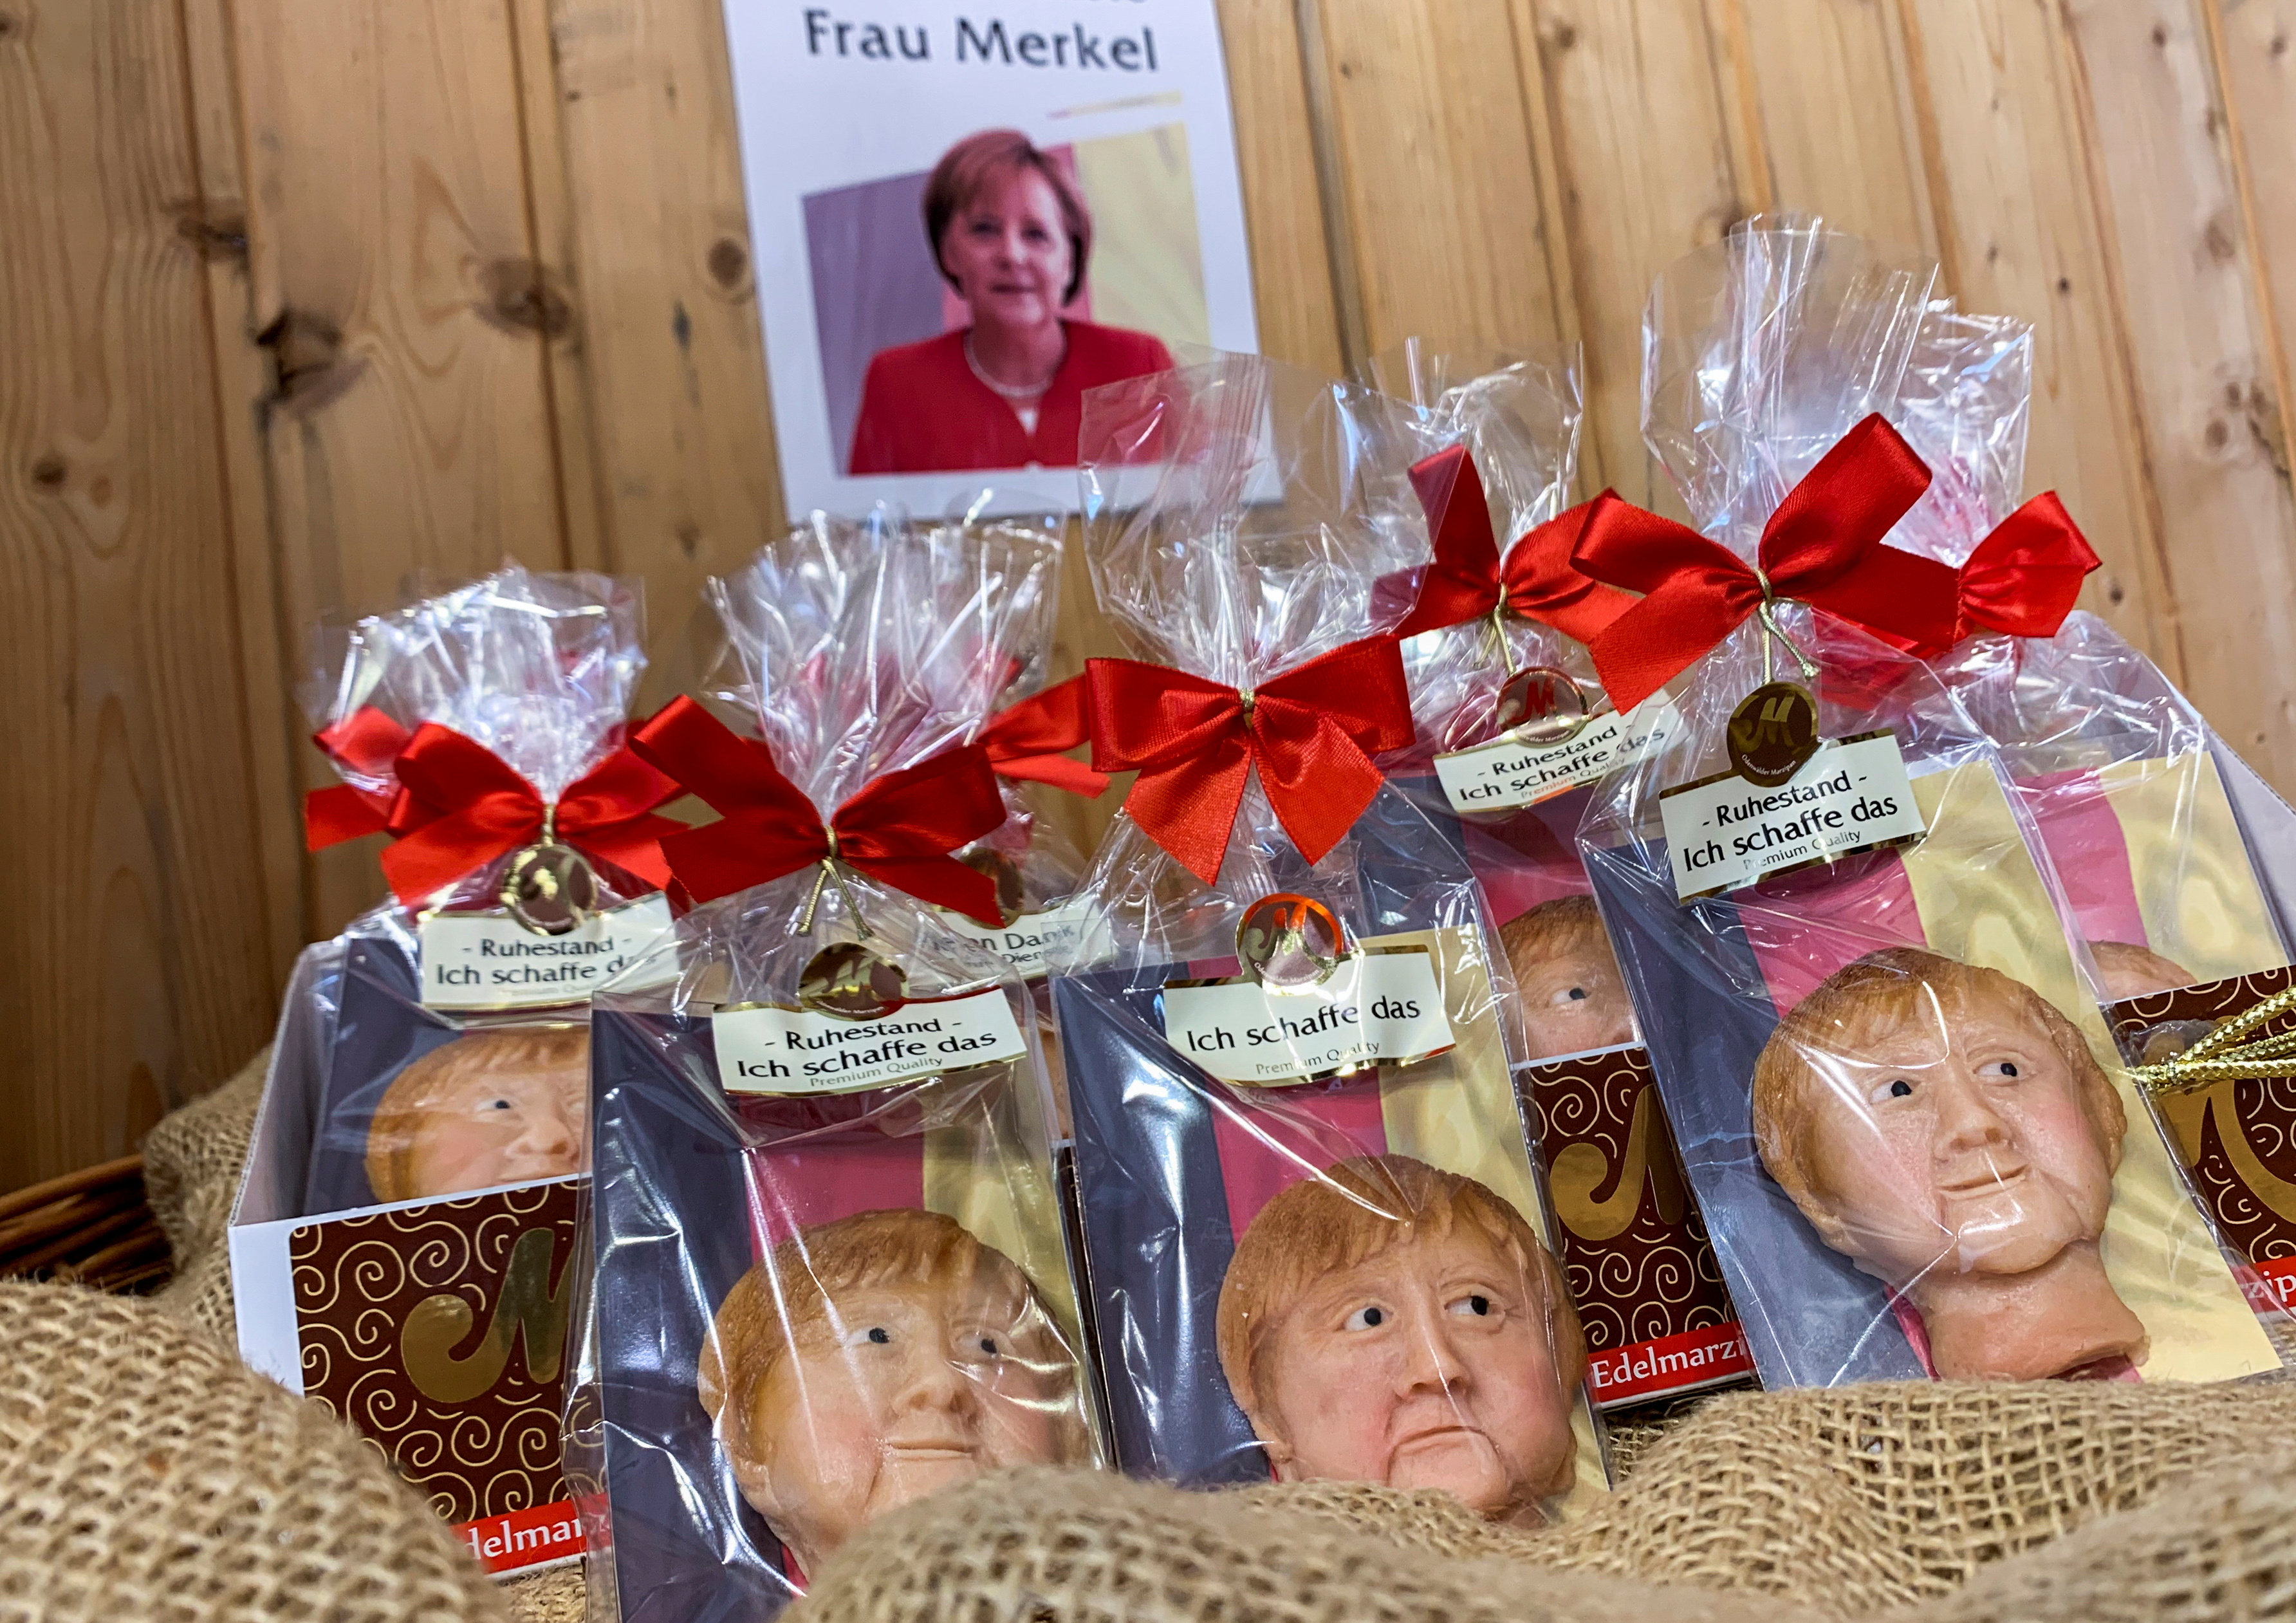 Marzipan cookies depicting German Chancellor Angela Merkel made by a German confectioner ahead of the September 26 elections, are displayed in Weilbach, Germany, September 14, 2021. REUTERS/Annkathrin Weis